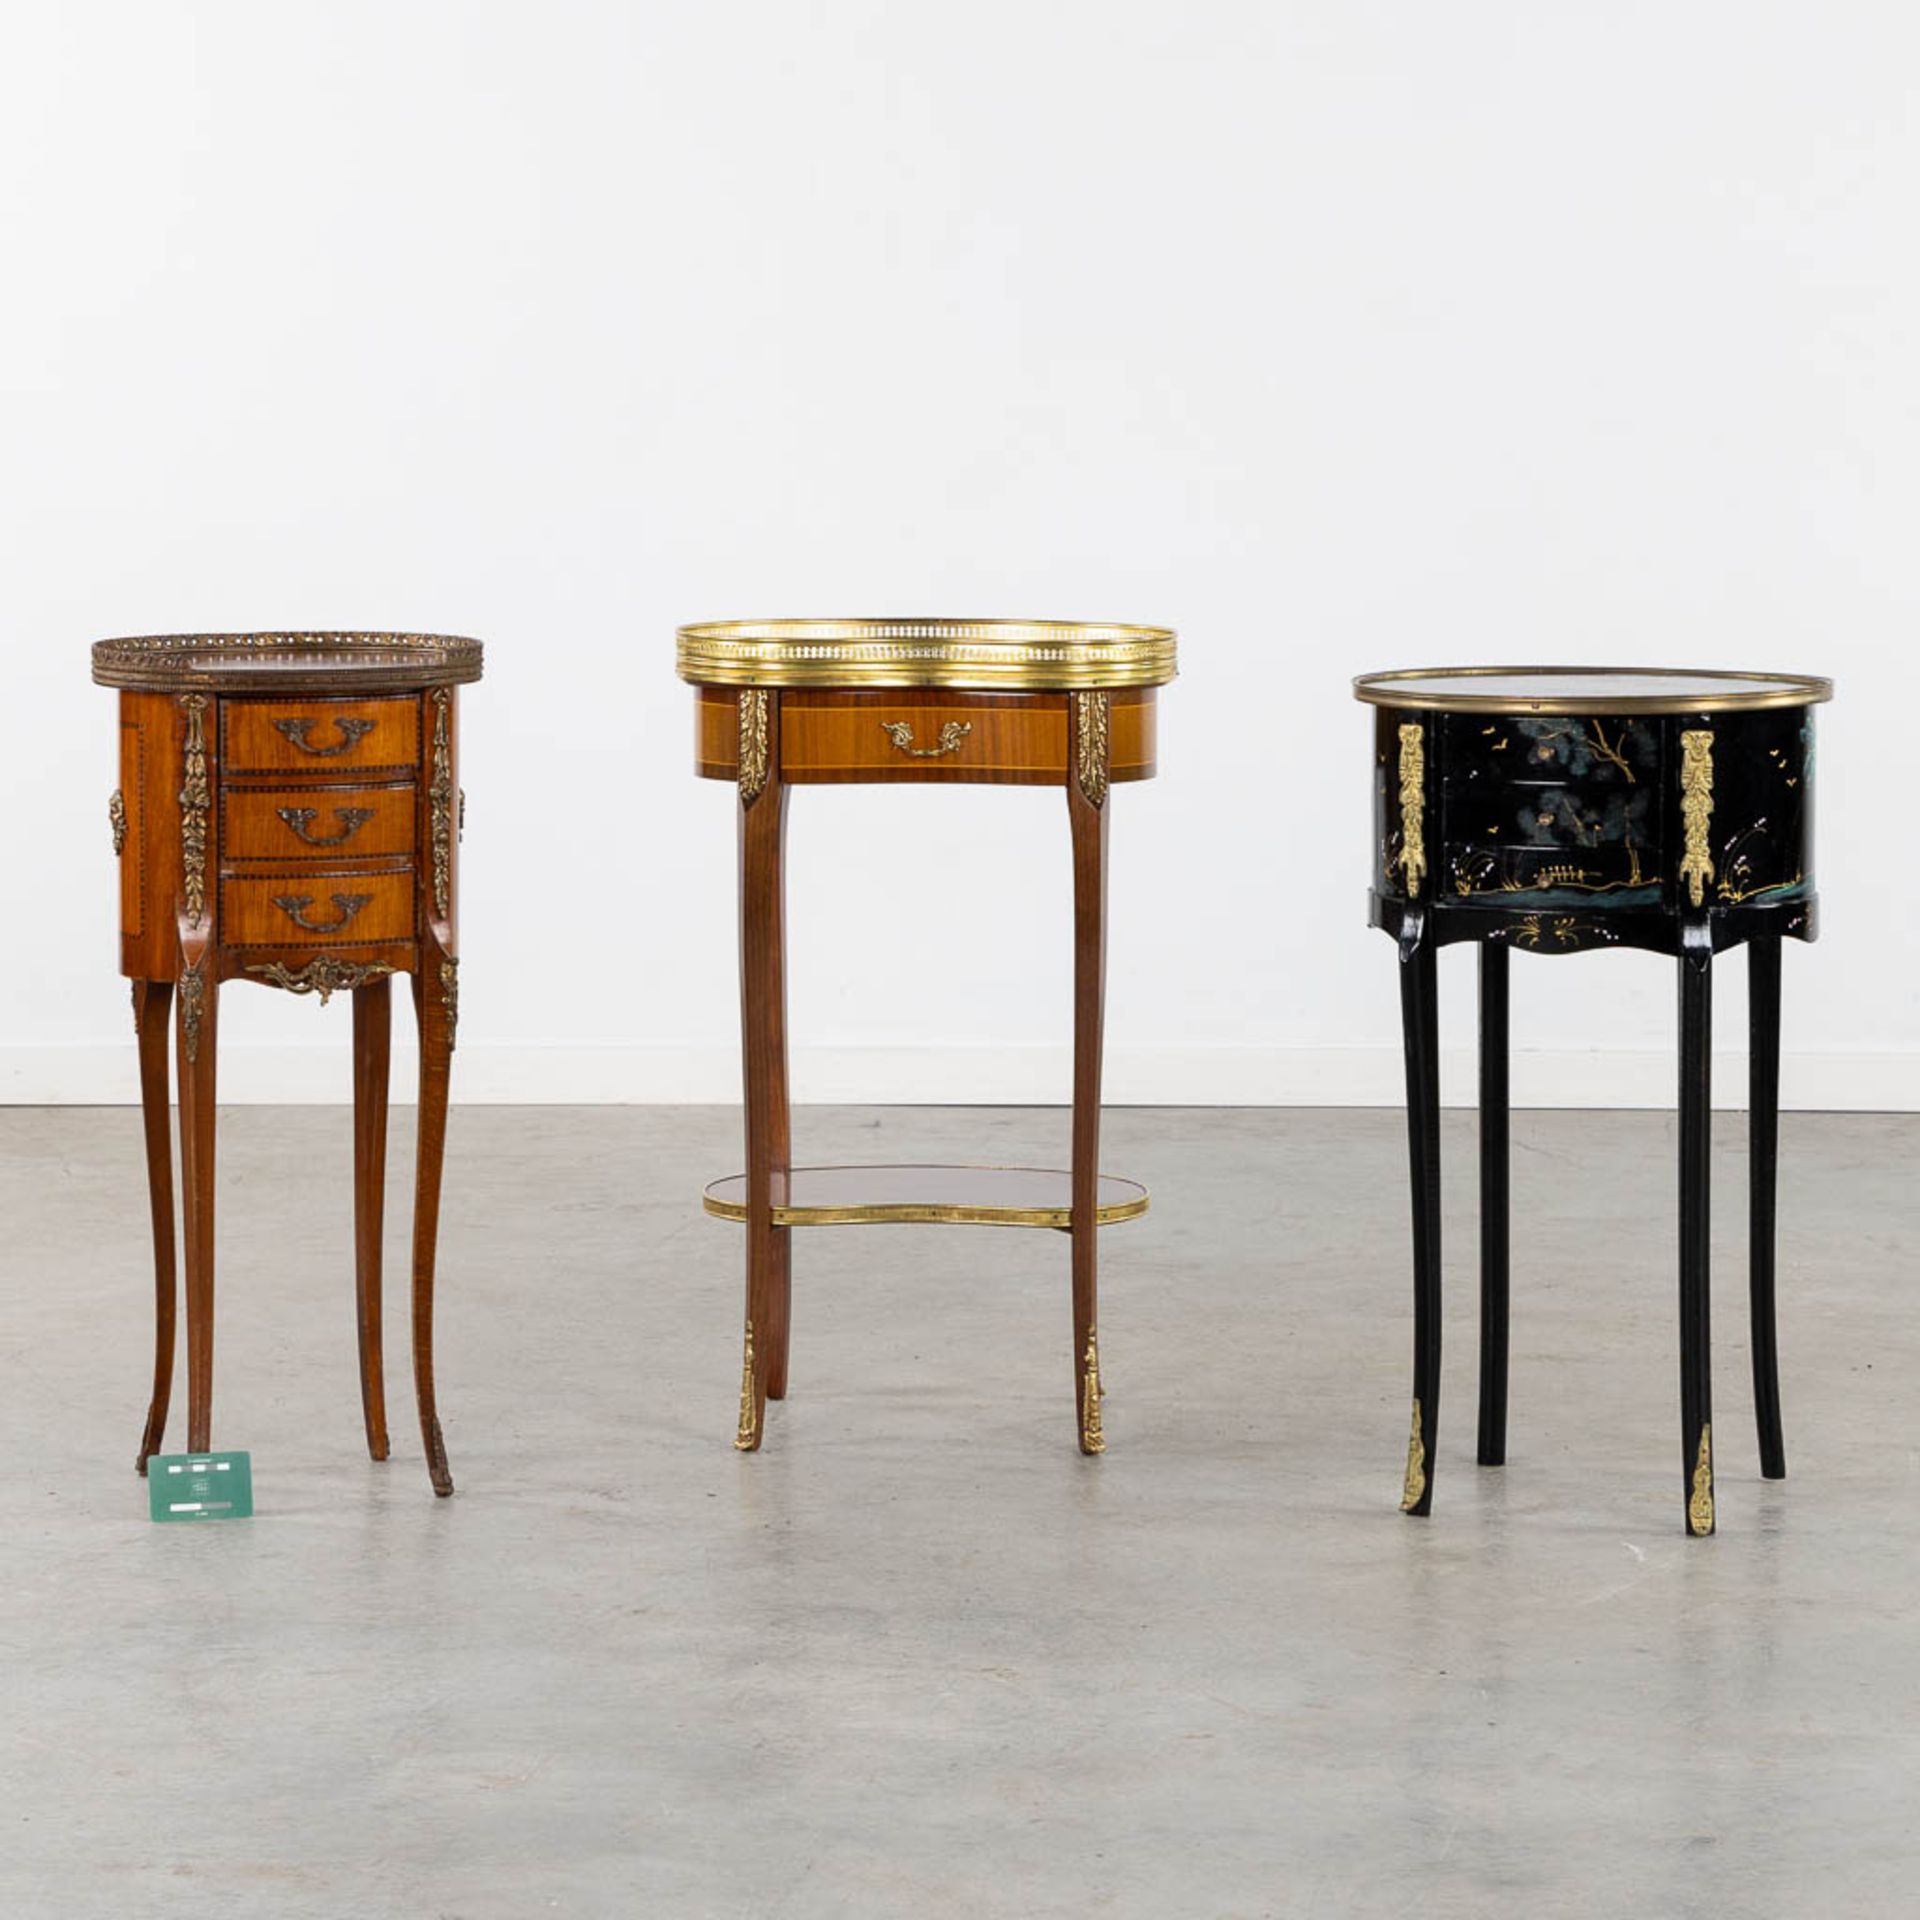 Three small side tables, marquetry and painted decor. 20th C. (L:30 x W:44 x H:71 cm) - Bild 2 aus 14